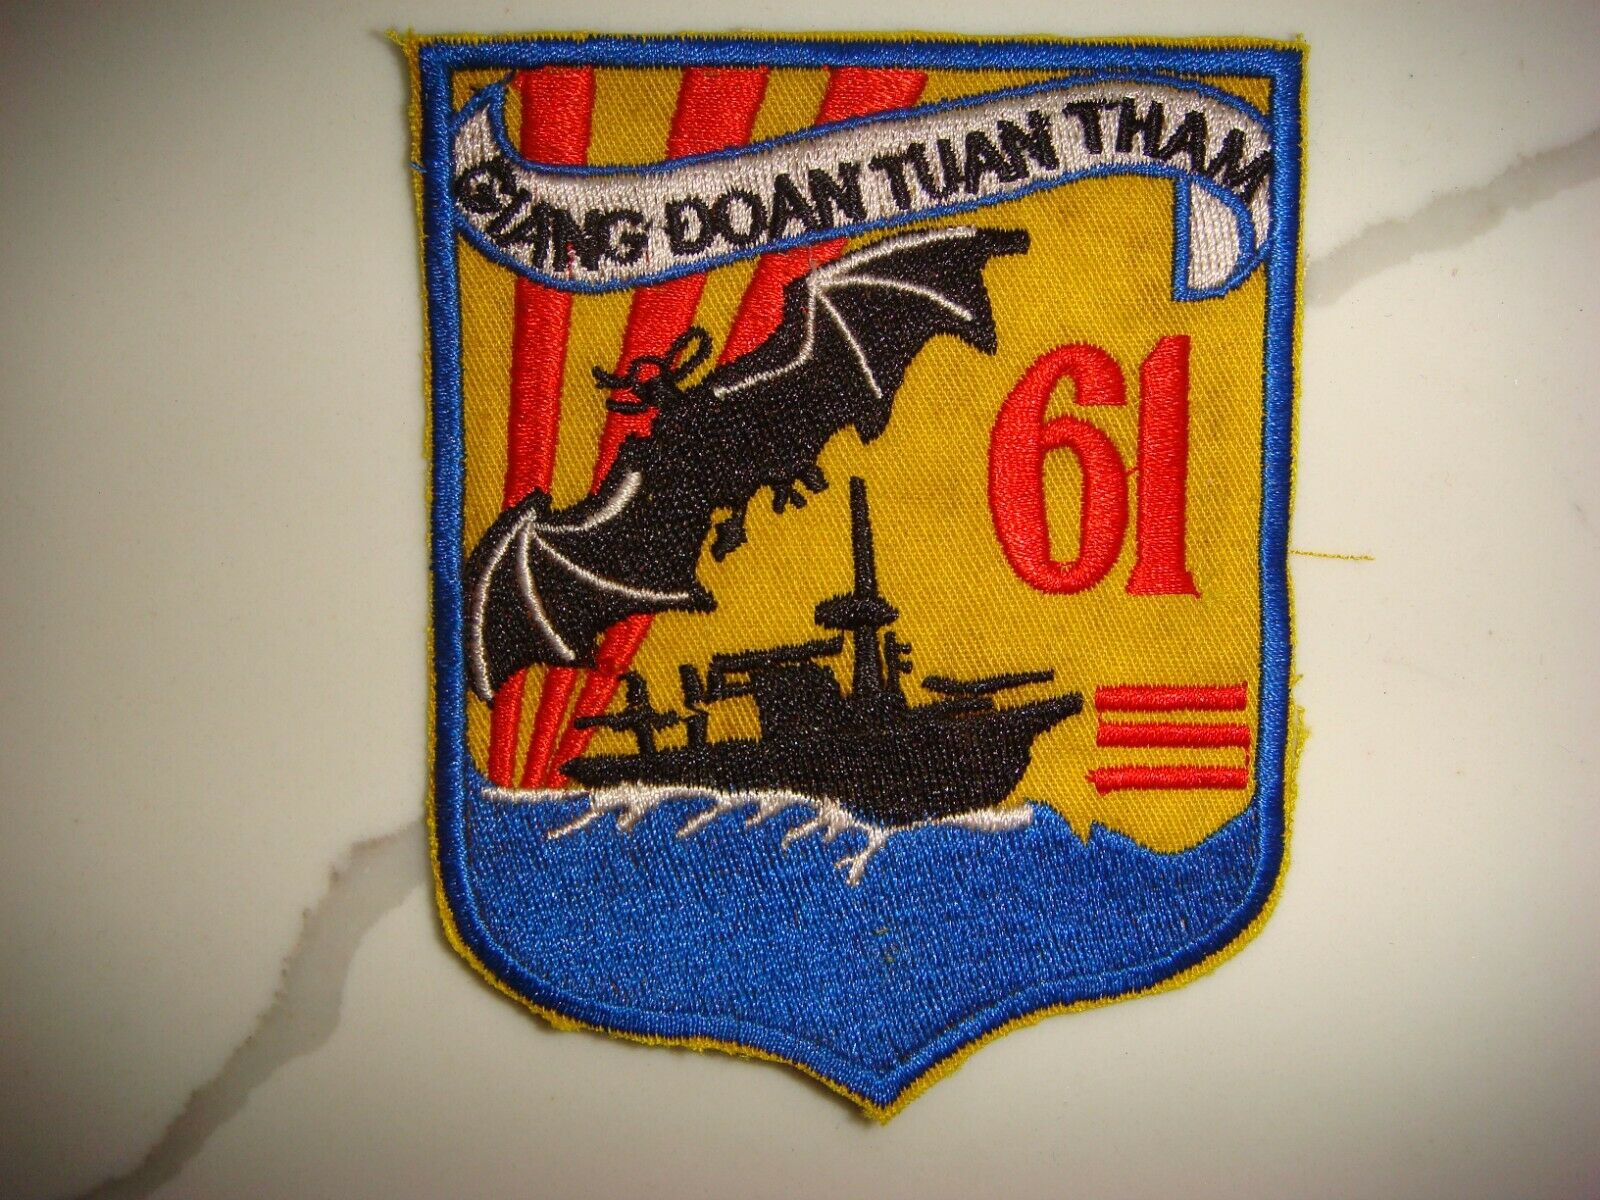 Coat of arms (crest) of the River Patrol Reconnaissance Team 61, RVN